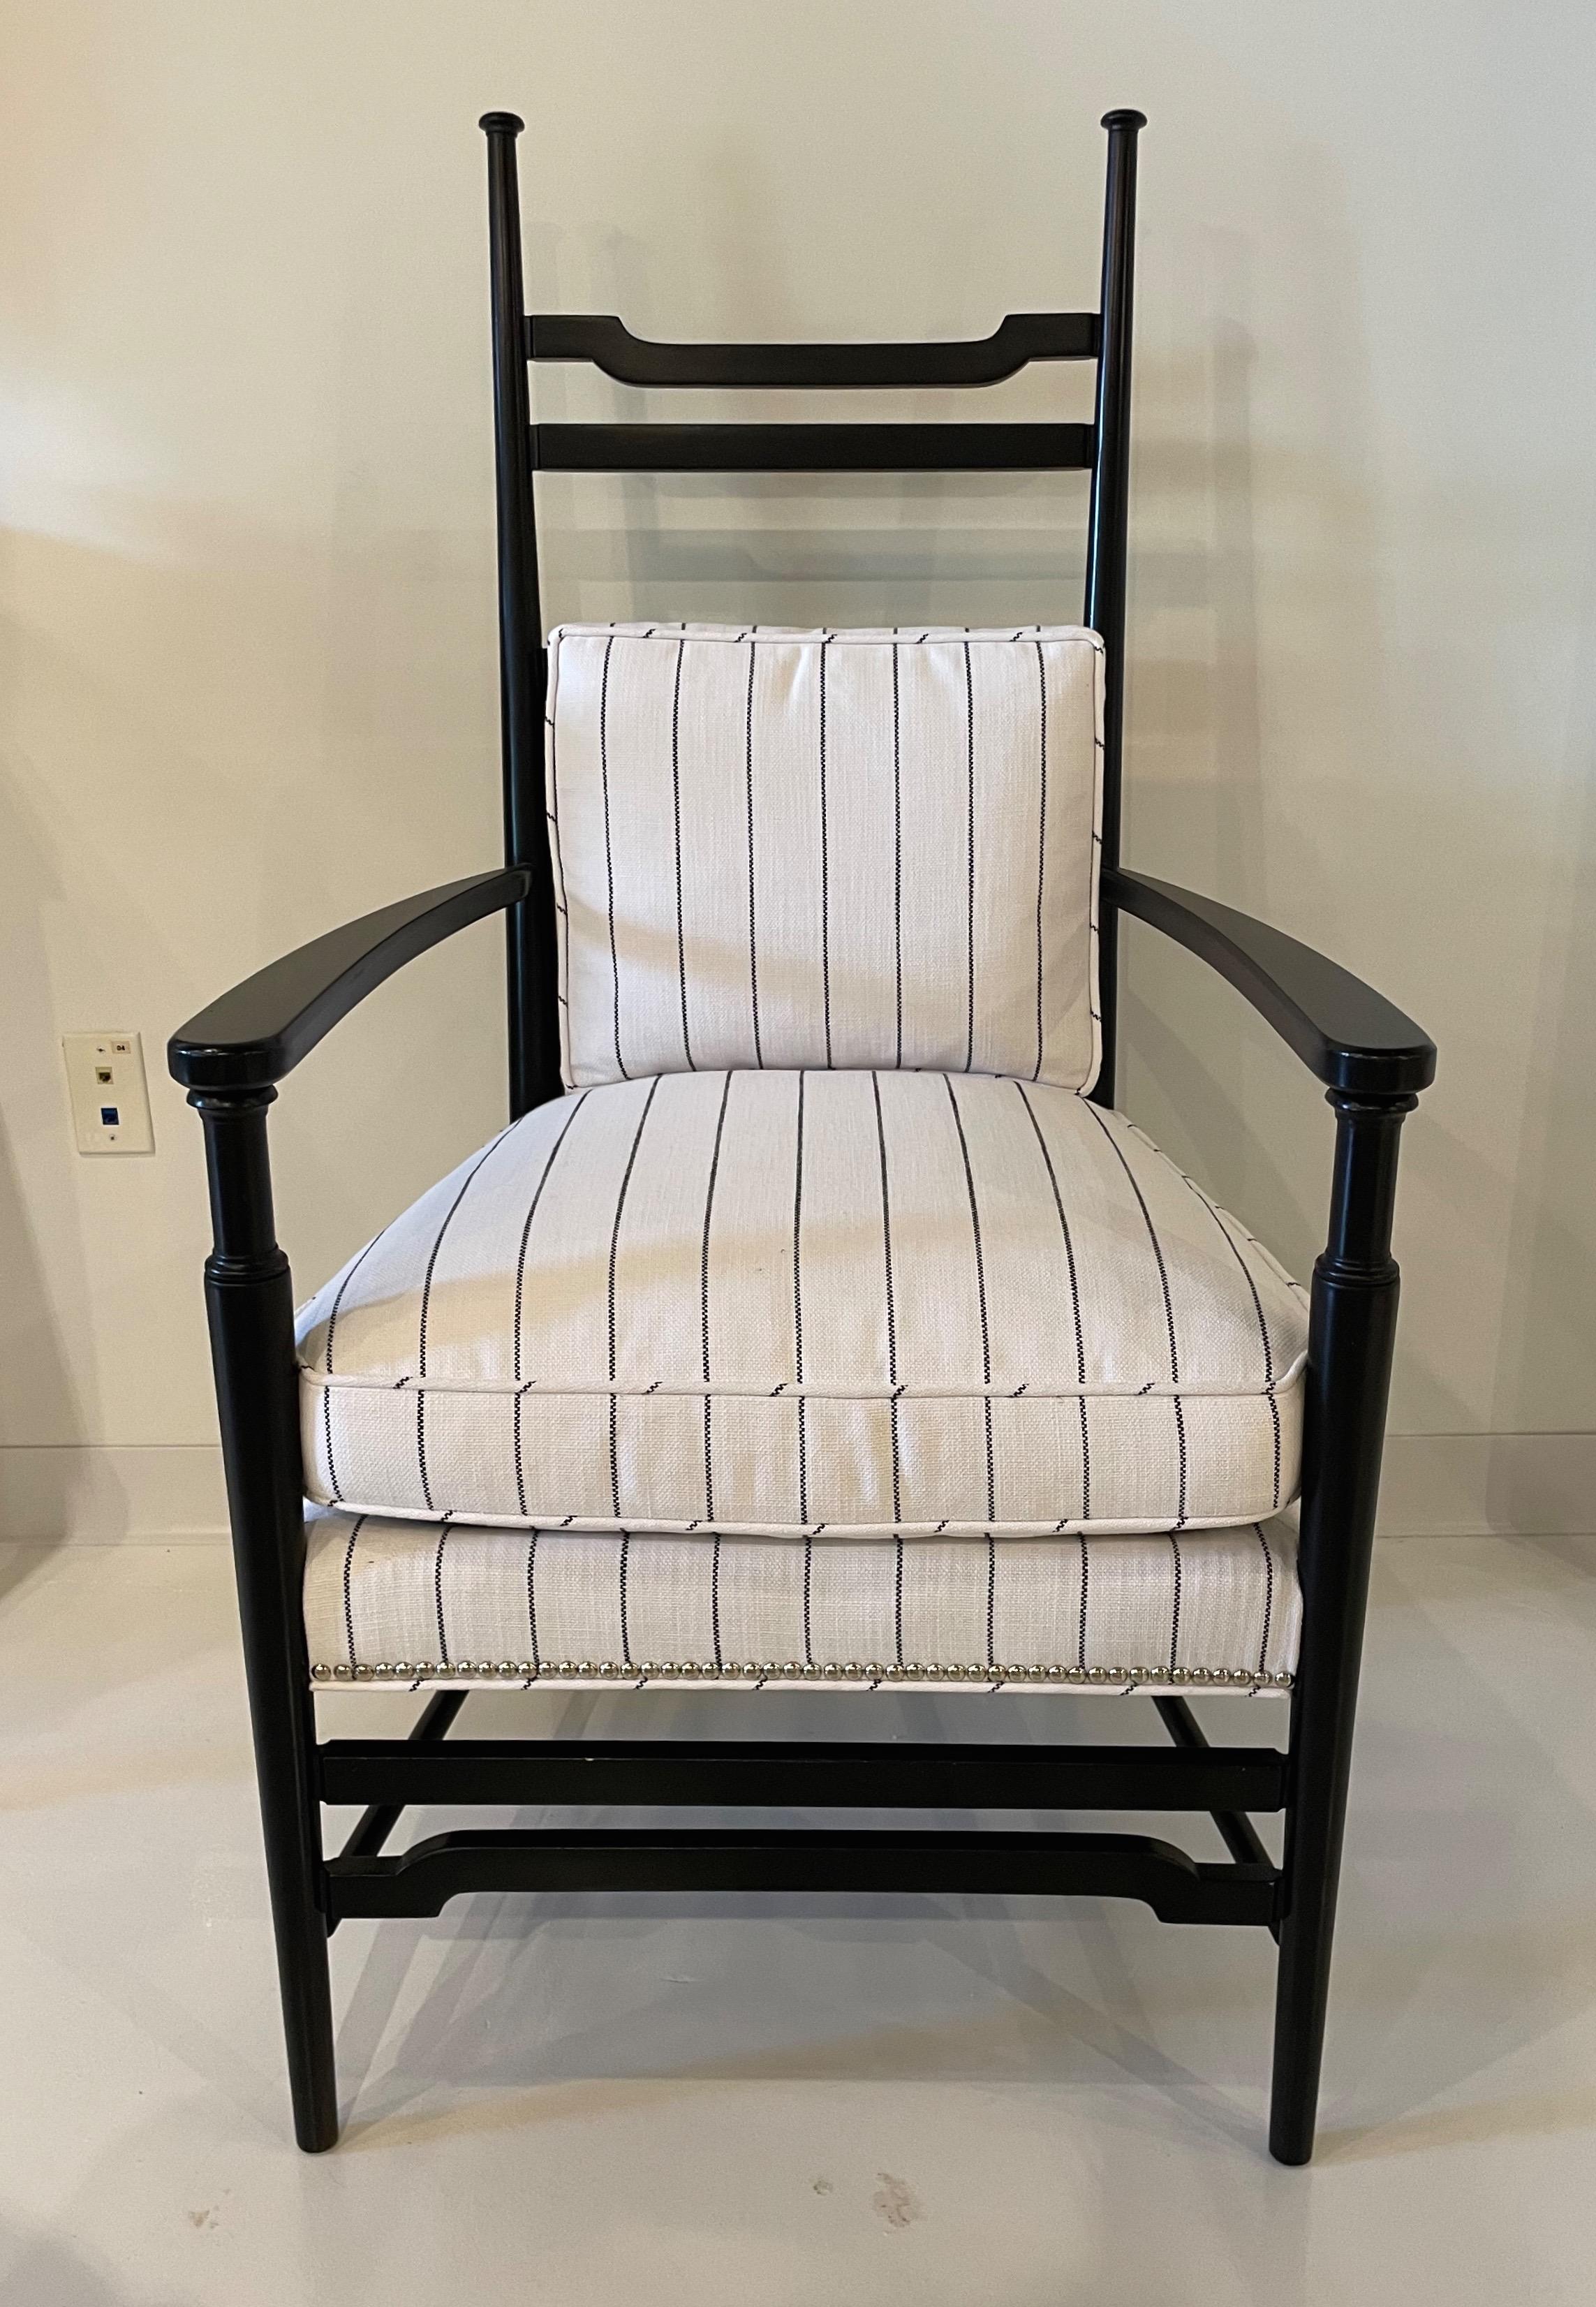 Showroom New - Hickory Chair's Iconic Country Occasional chair. Perfect for a Modern Farmhouse Interior or a more Traditional setting. Handcrafted frame and comfortable upholstery. Spring Down seat cushion and hand nailed polished chrome nail trim.